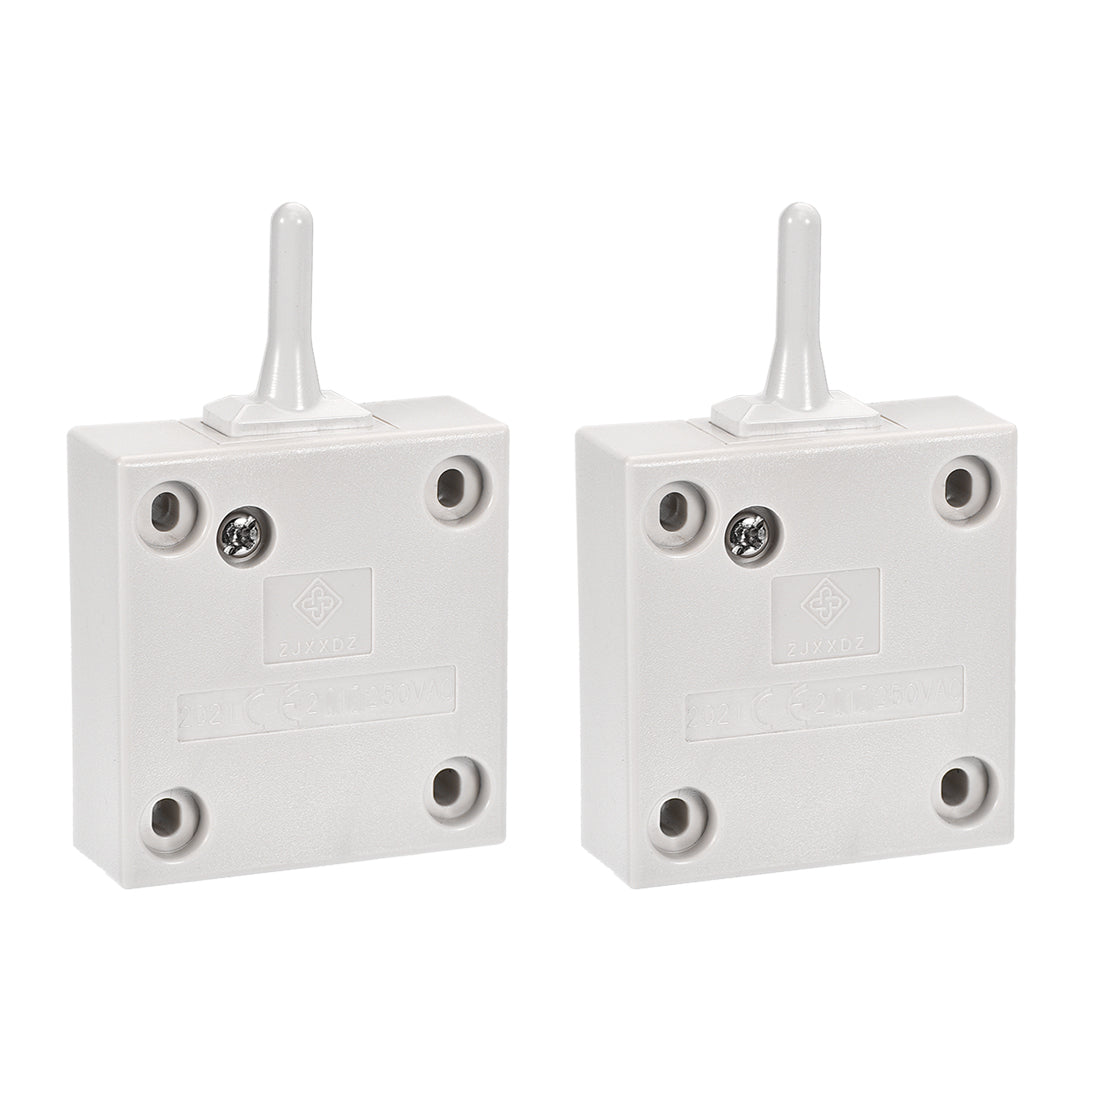 uxcell Uxcell Wardrobe Door Light Switch Momentary Closets Switch Normally Closed 110-250V 2A White 2 Pcs